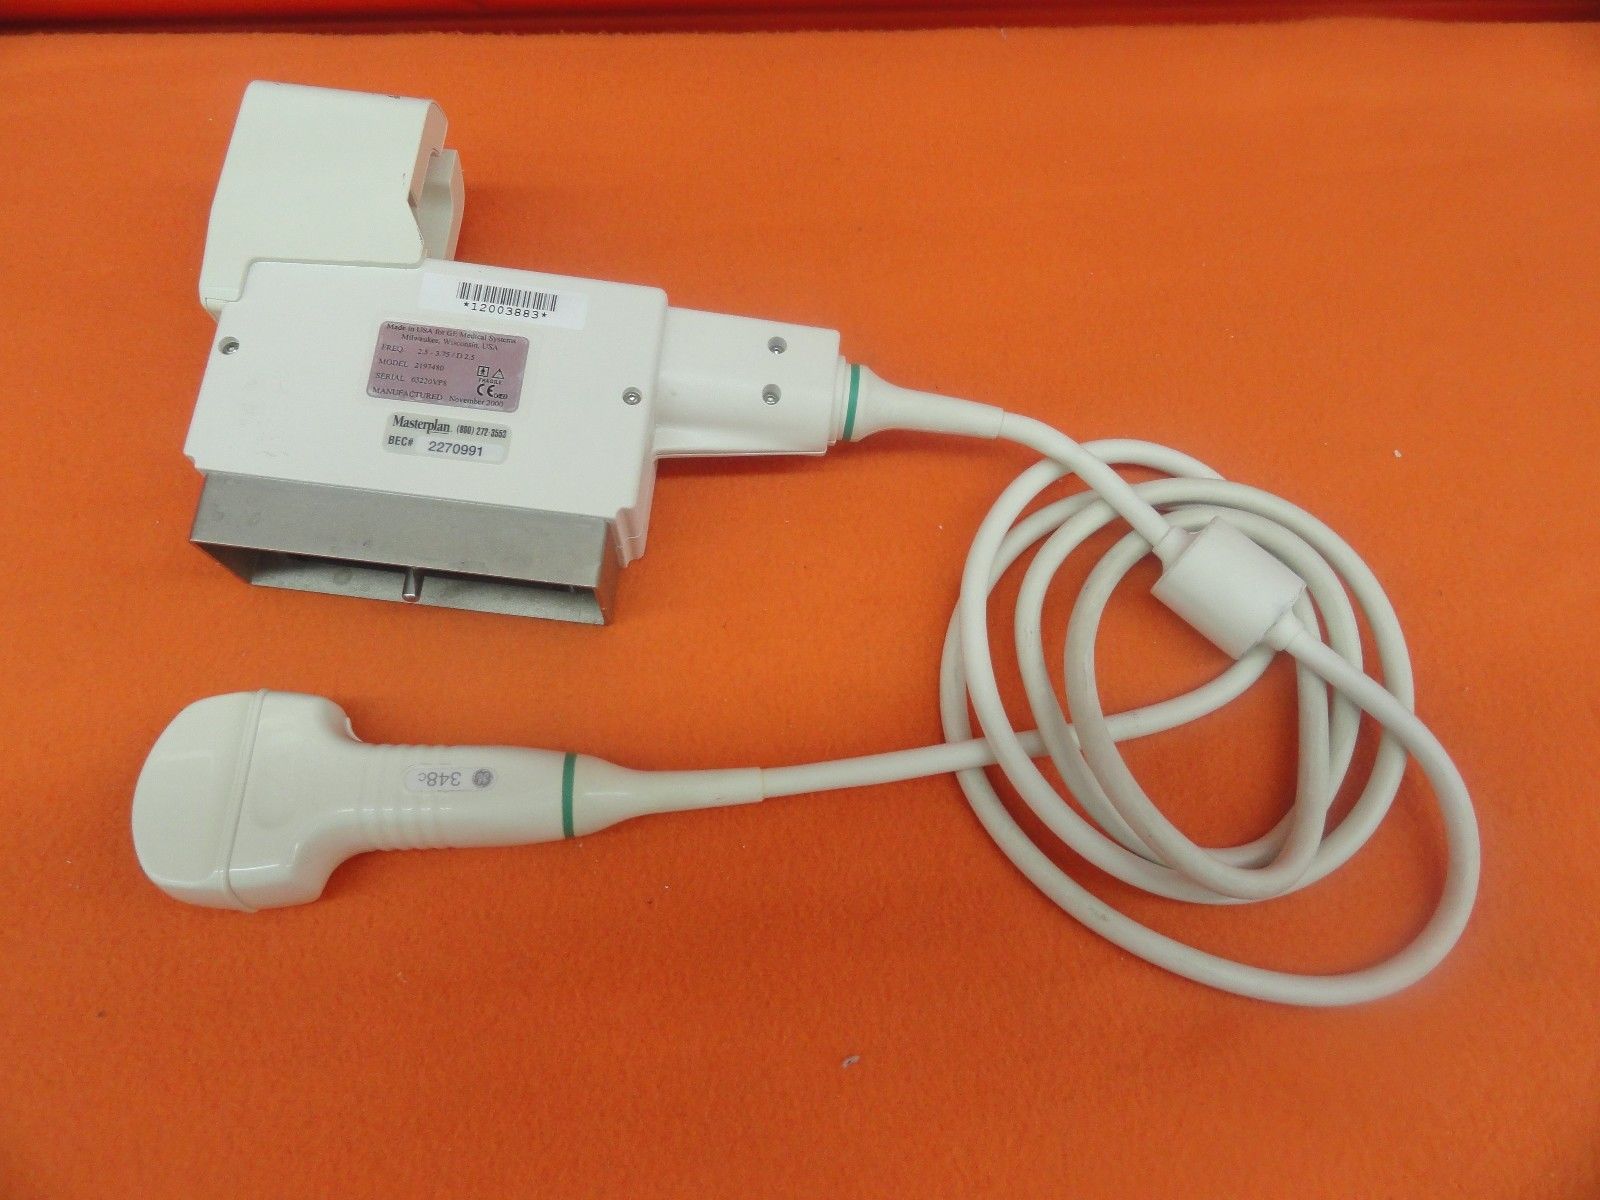 GE 348c P/N 2197480 Convex Array Probe for GE 700, 700 PRO and 700 Expert (5514) DIAGNOSTIC ULTRASOUND MACHINES FOR SALE